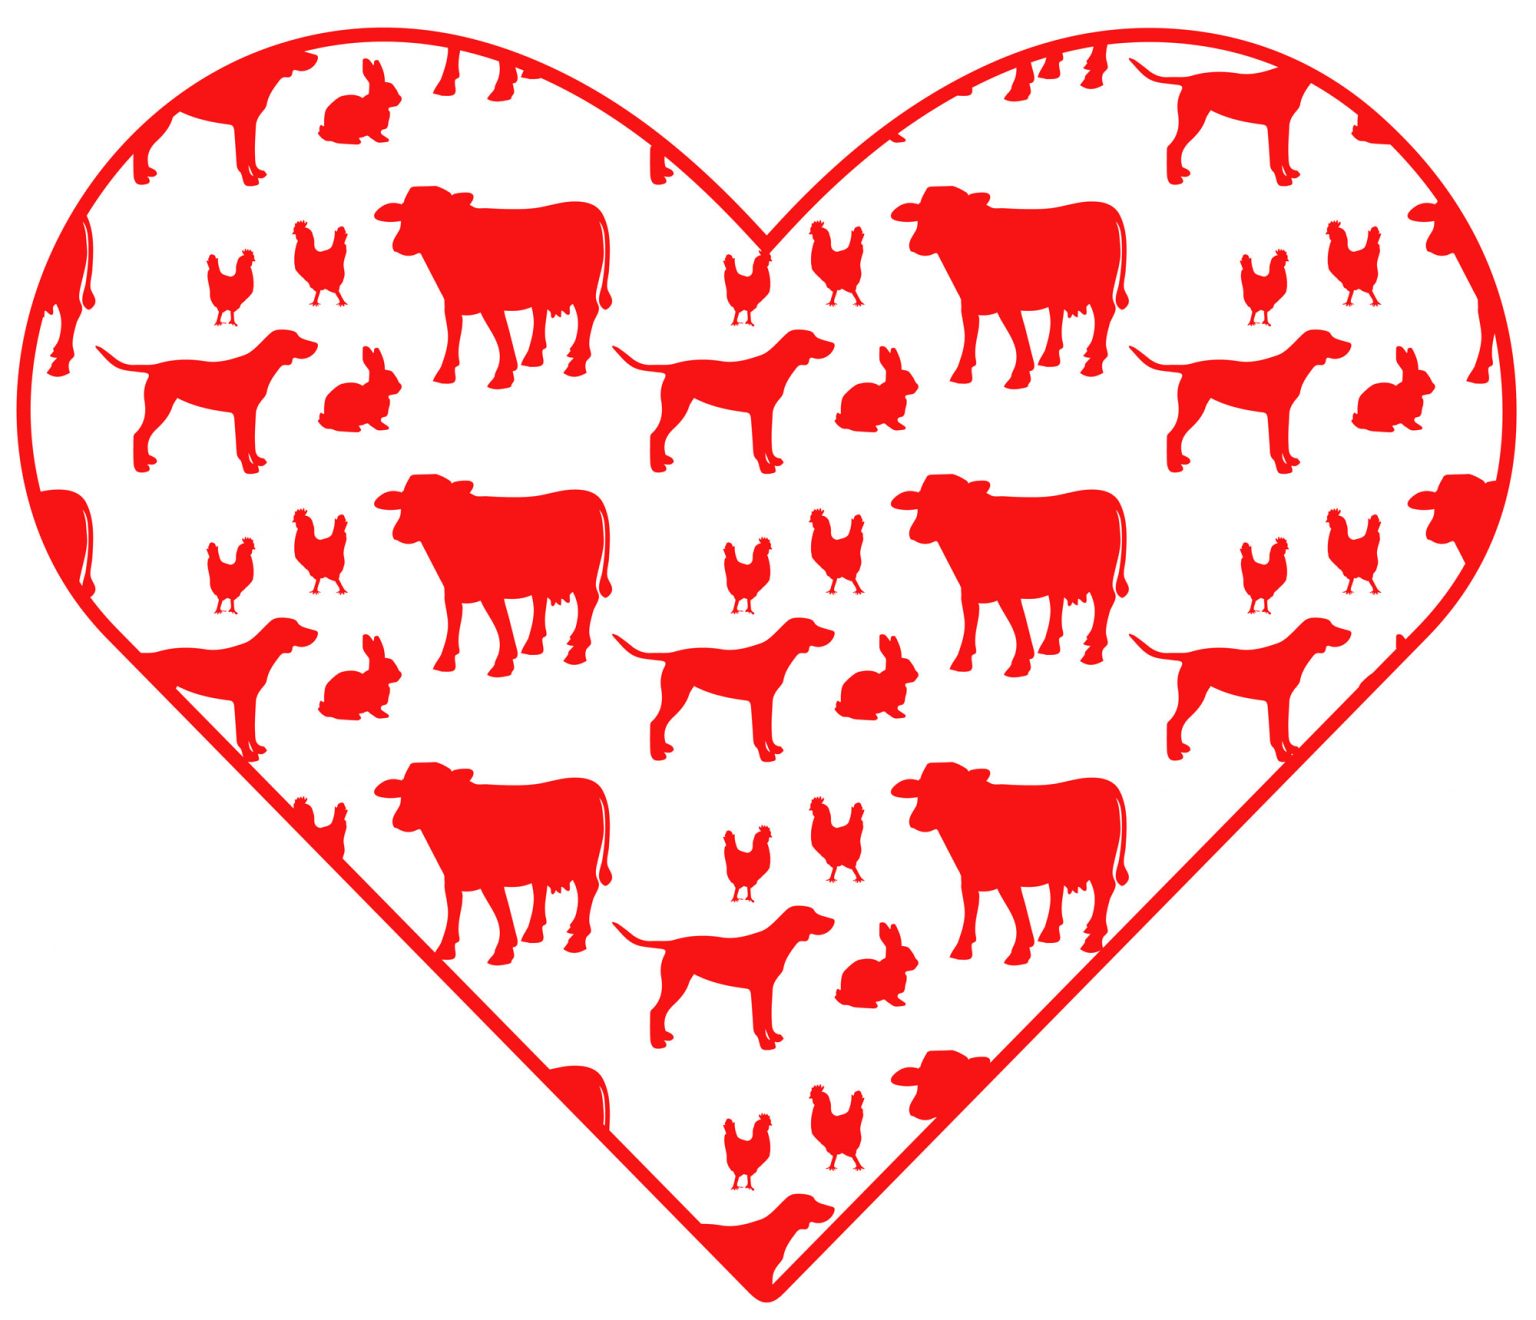 lowry's farm animals in heart graphic